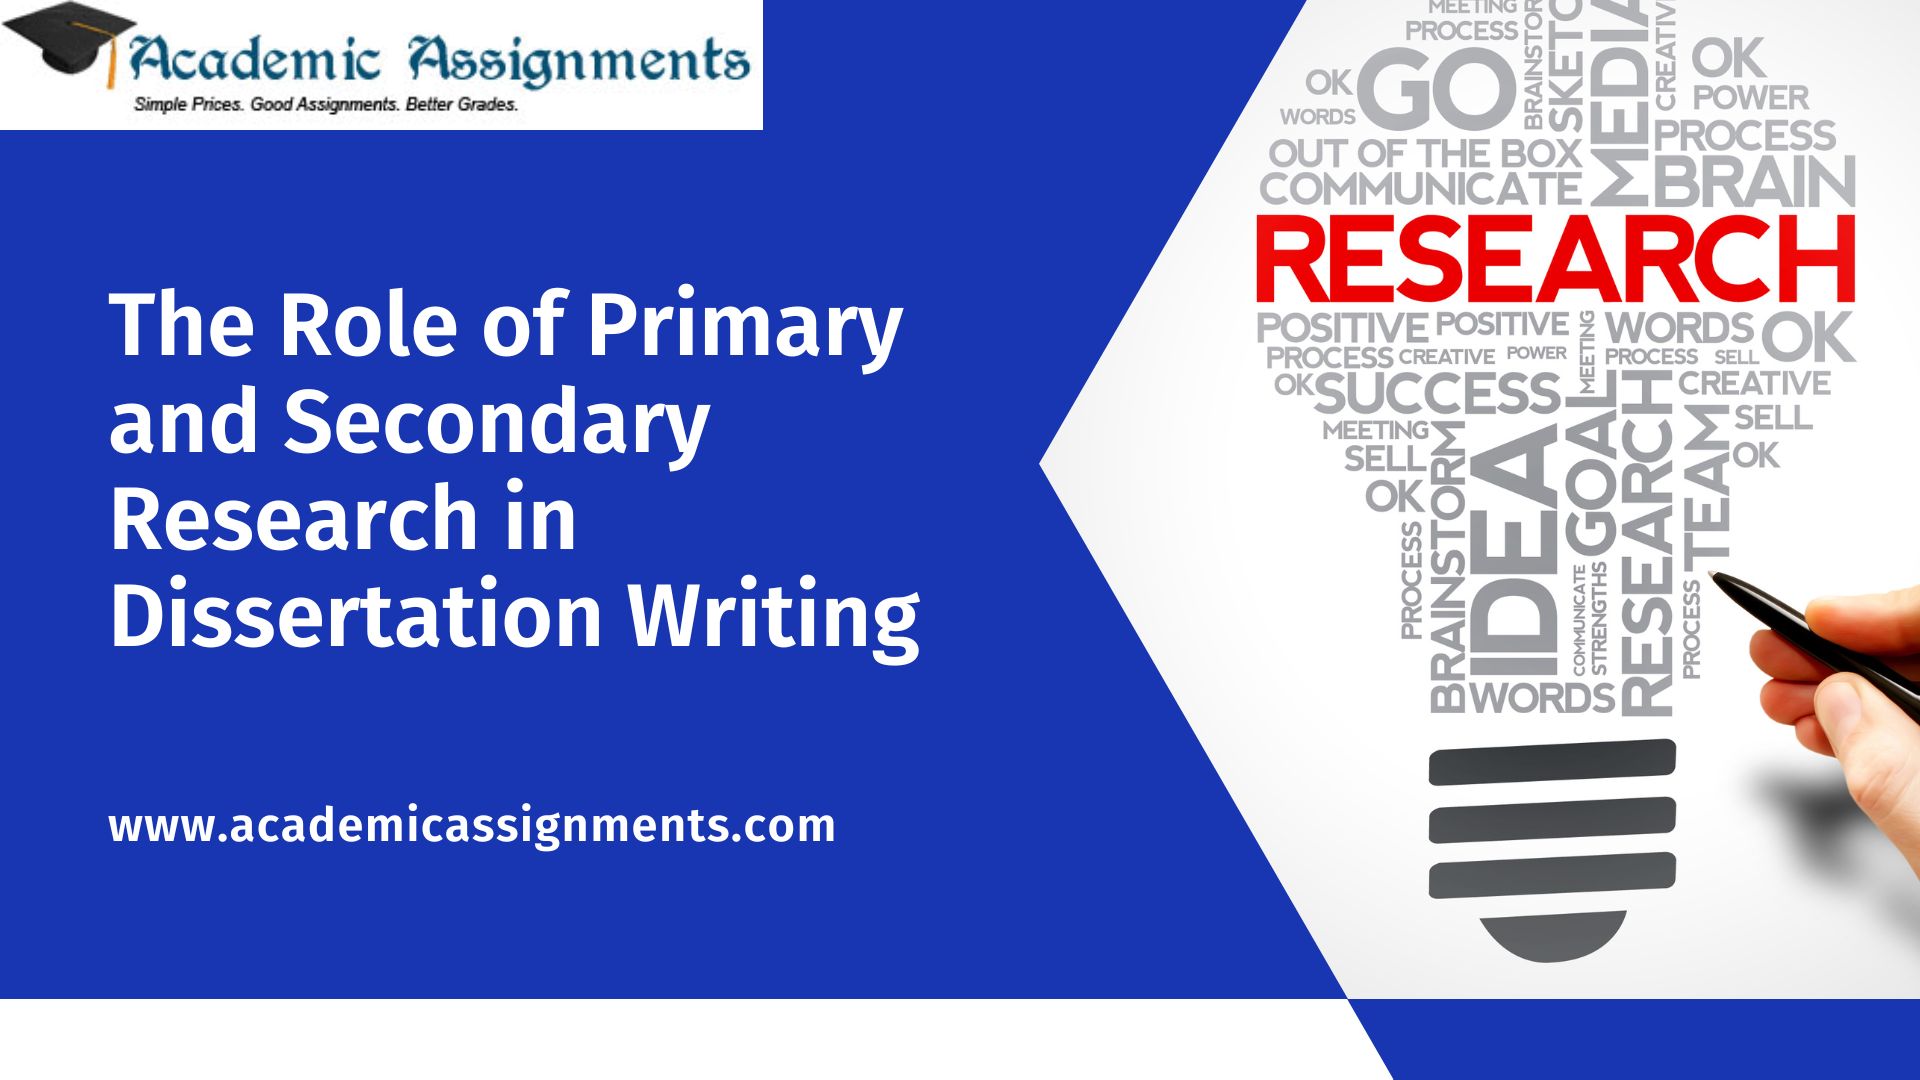 The Role of Primary and Secondary Research in Dissertation Writing